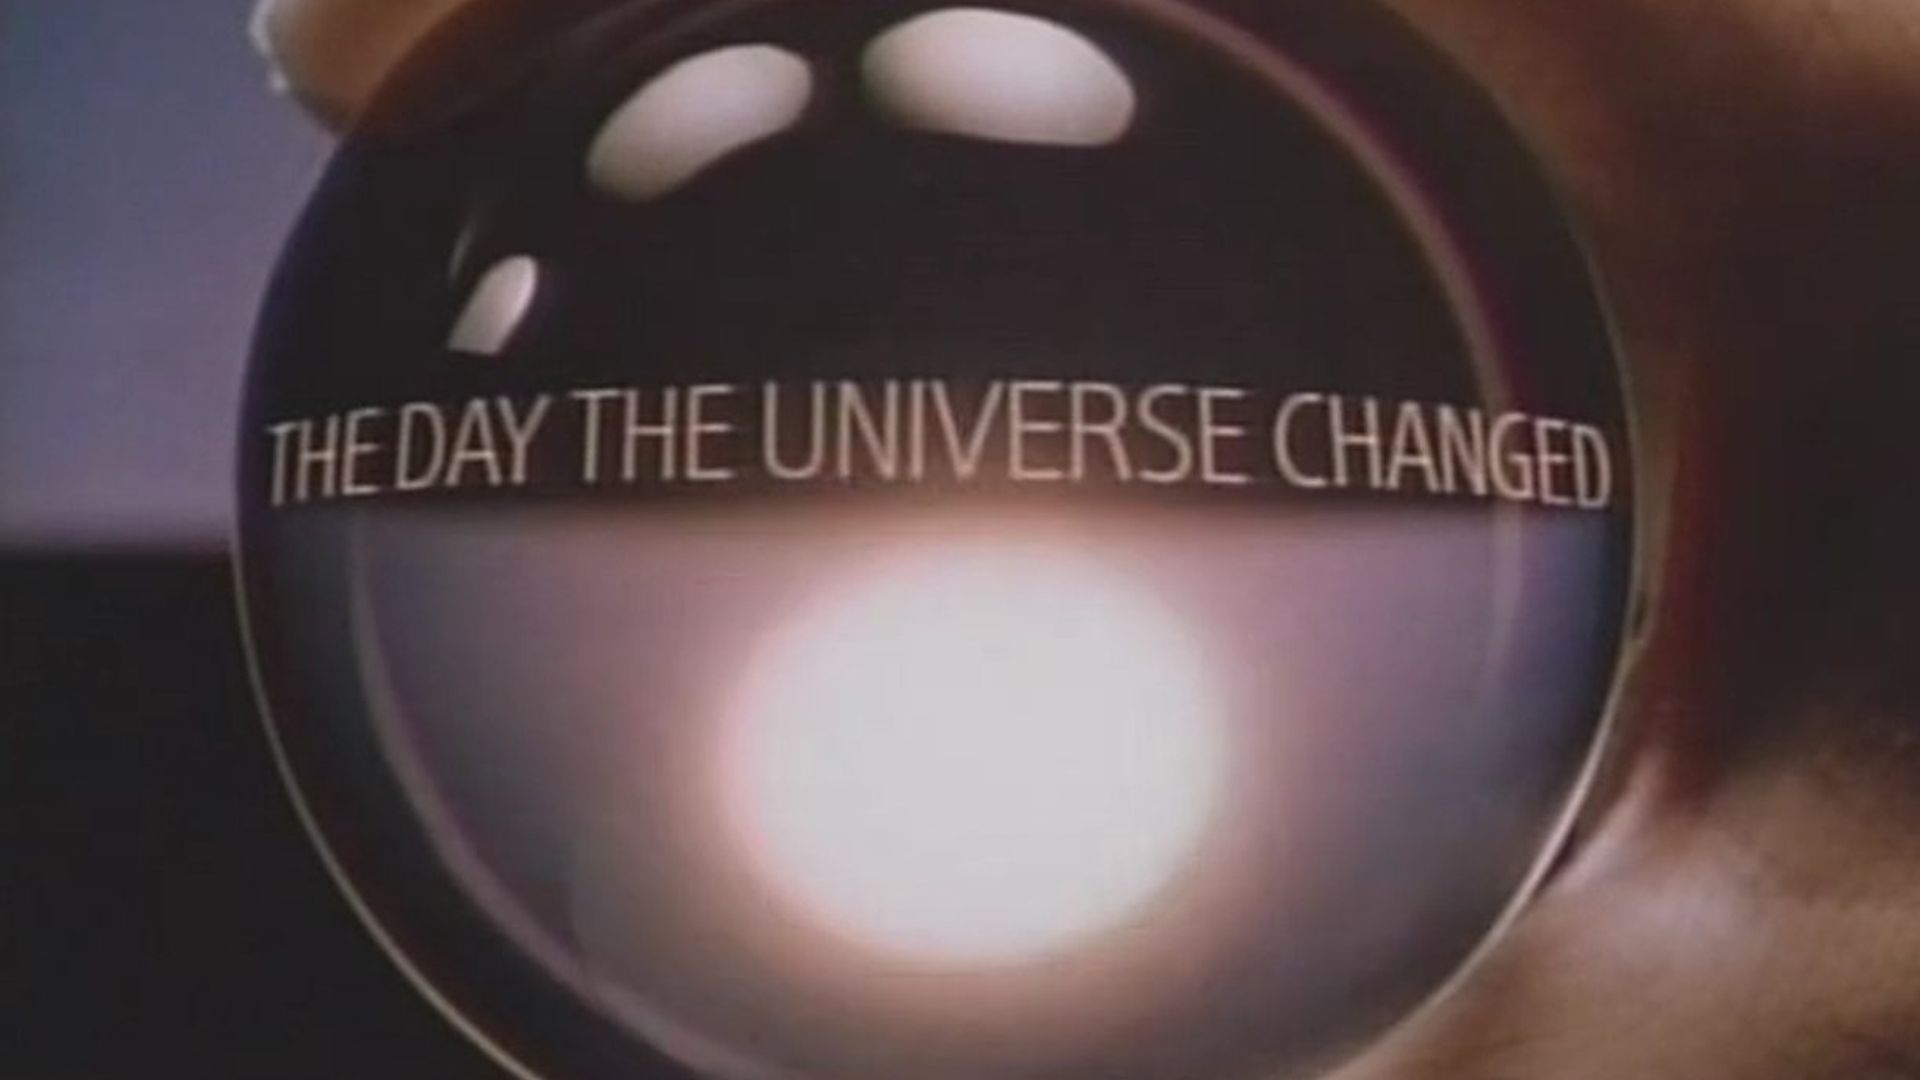 The Day the Universe Changed background